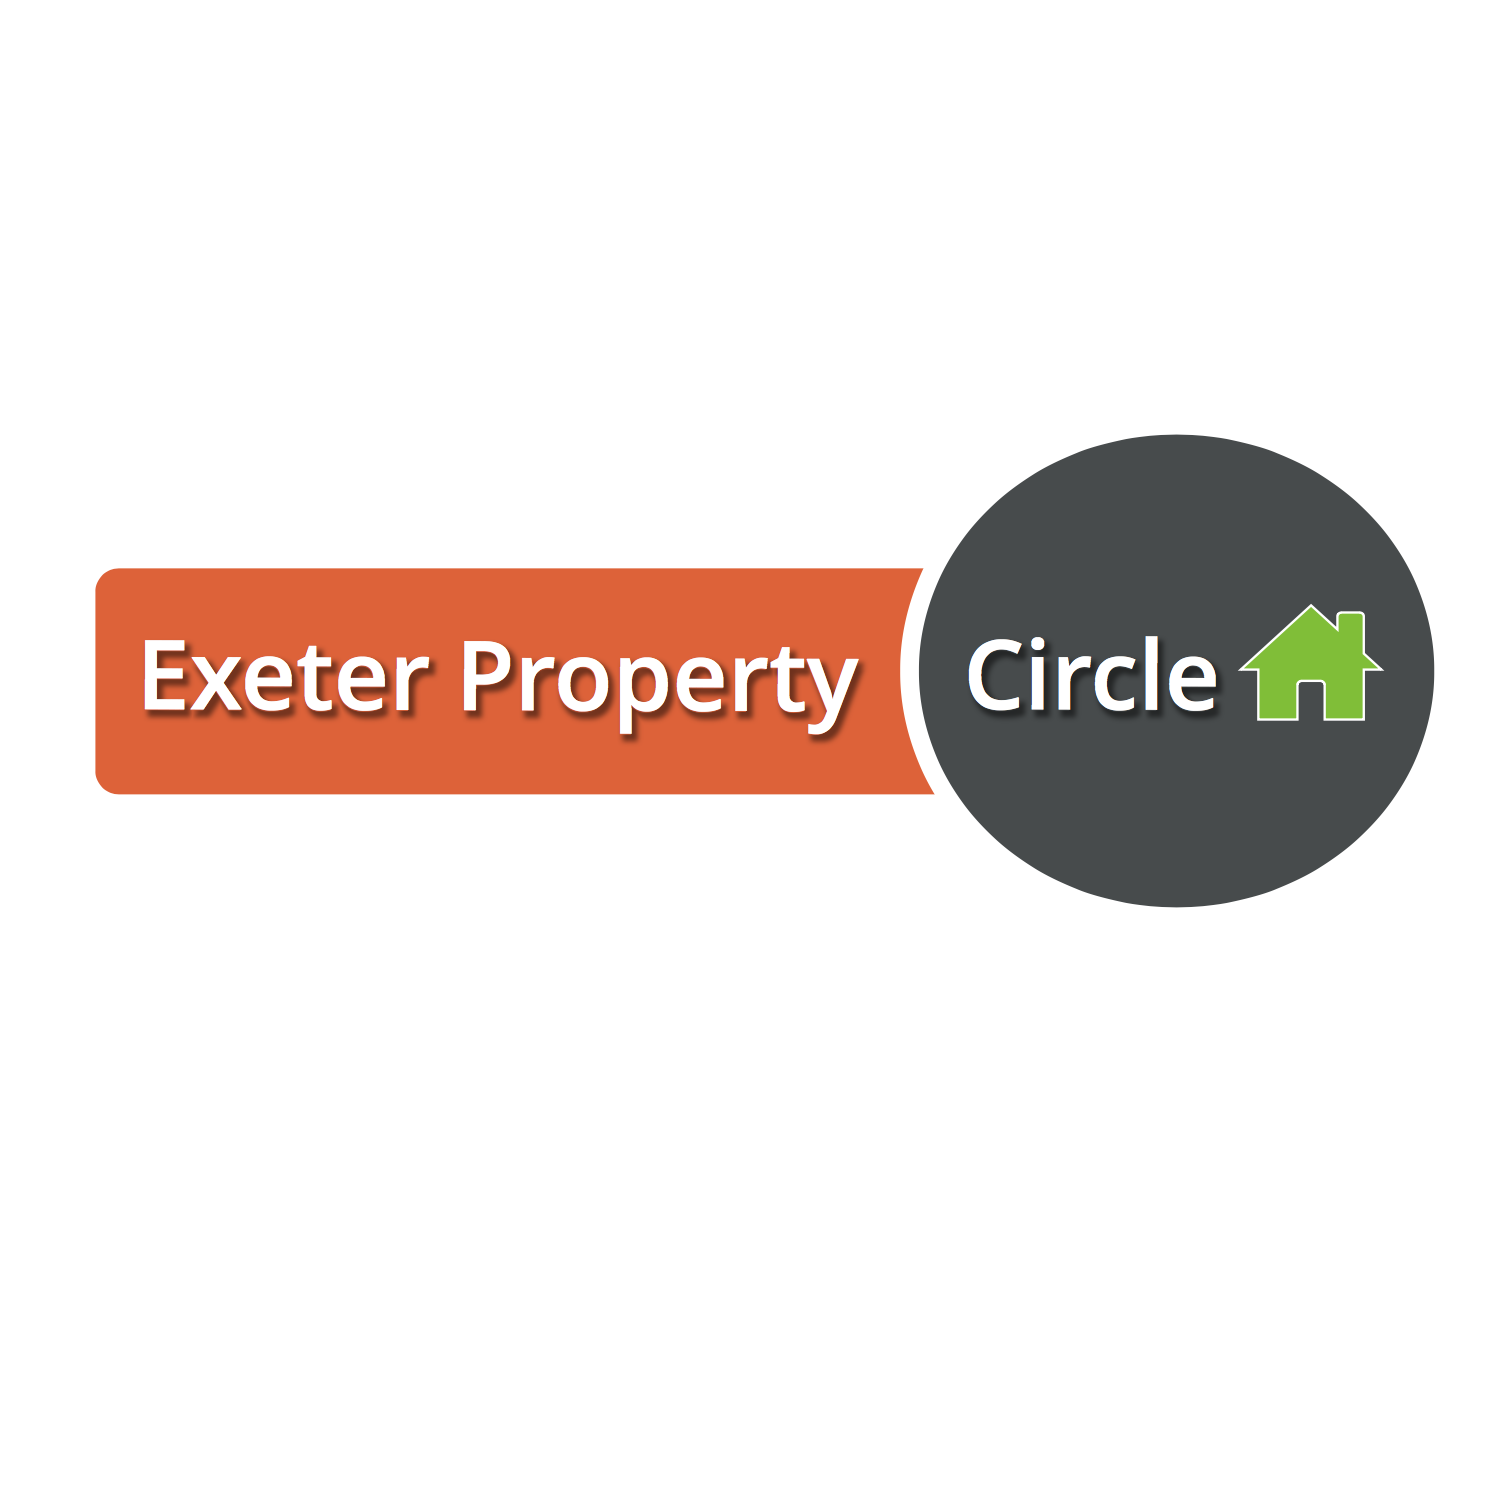 The Exeter Property Circle is an exciting business networking event designed specifically for property professionals in Exeter & the surrounding areas